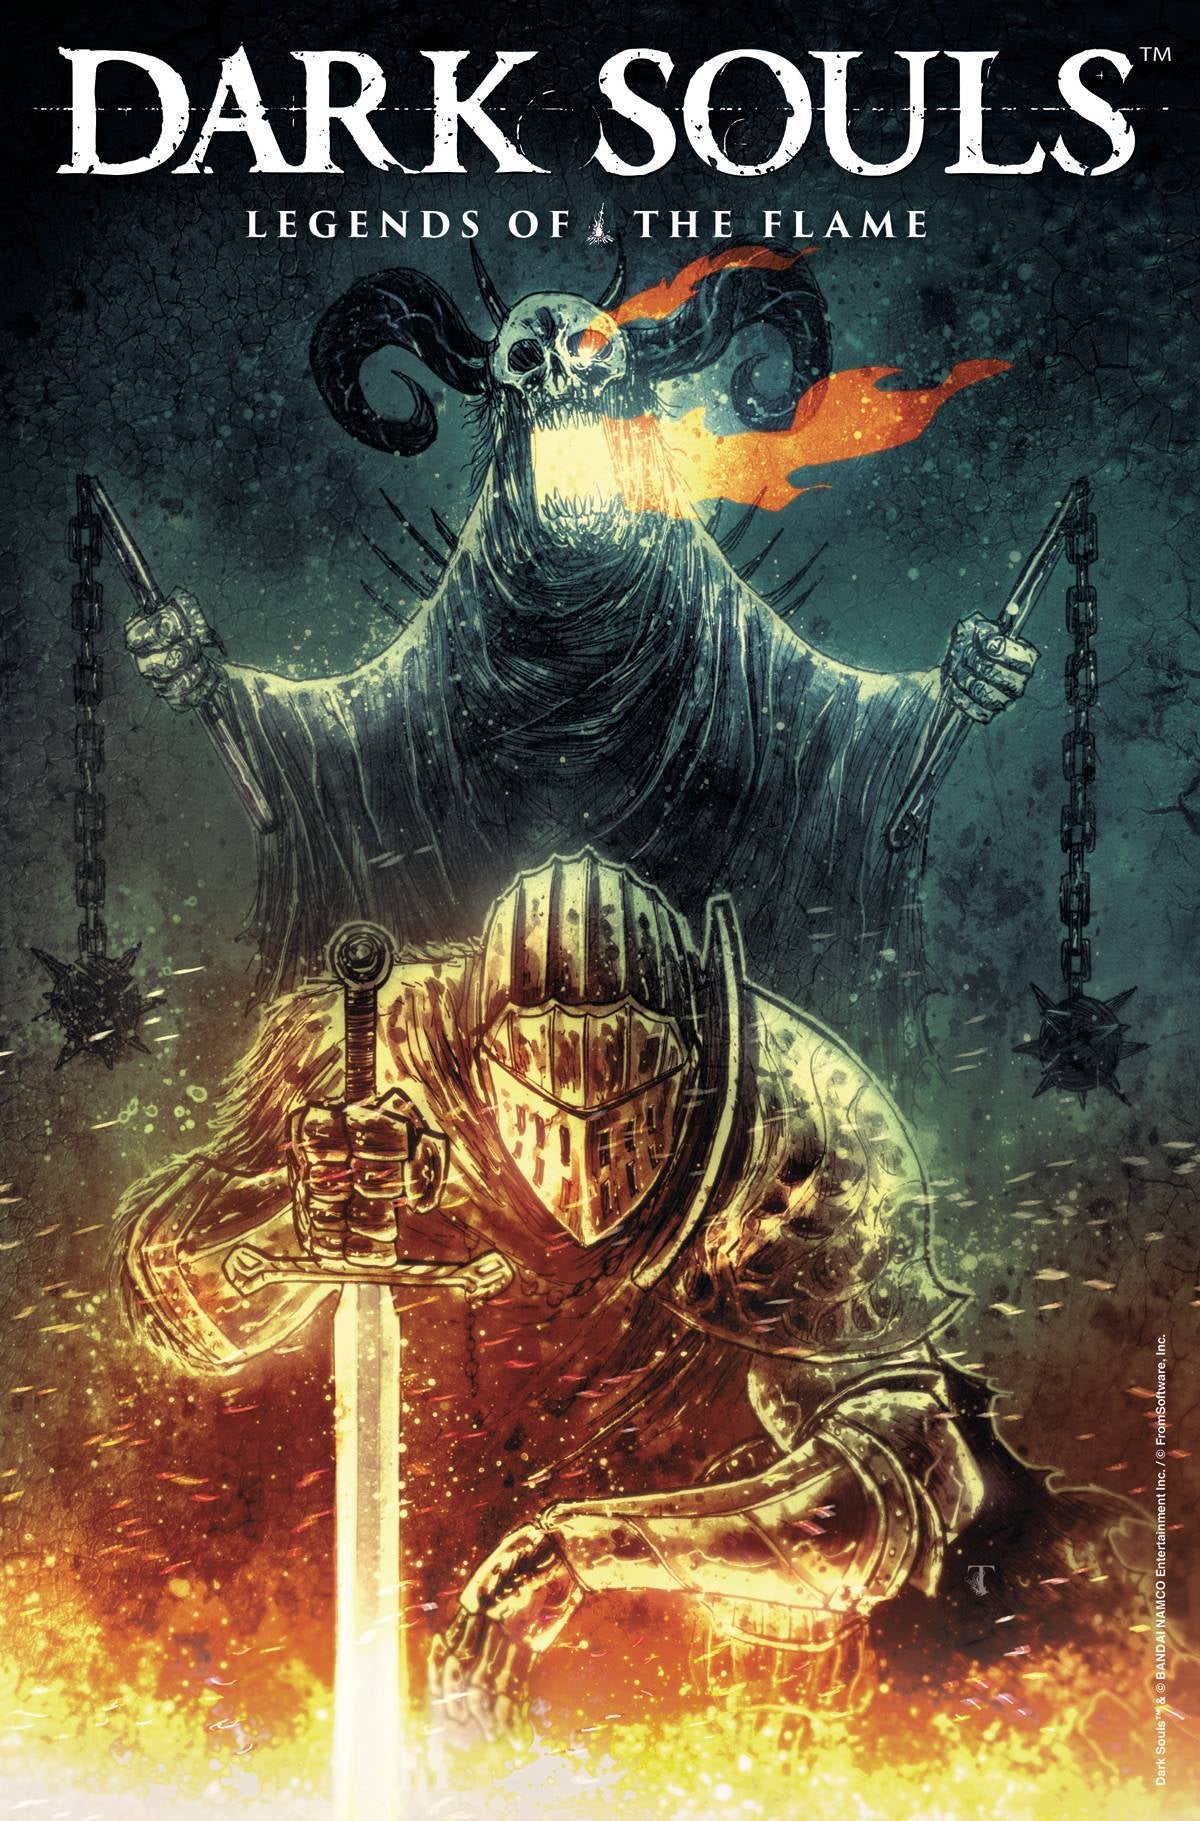 DARK SOULS LEGENDS OF THE FLAME